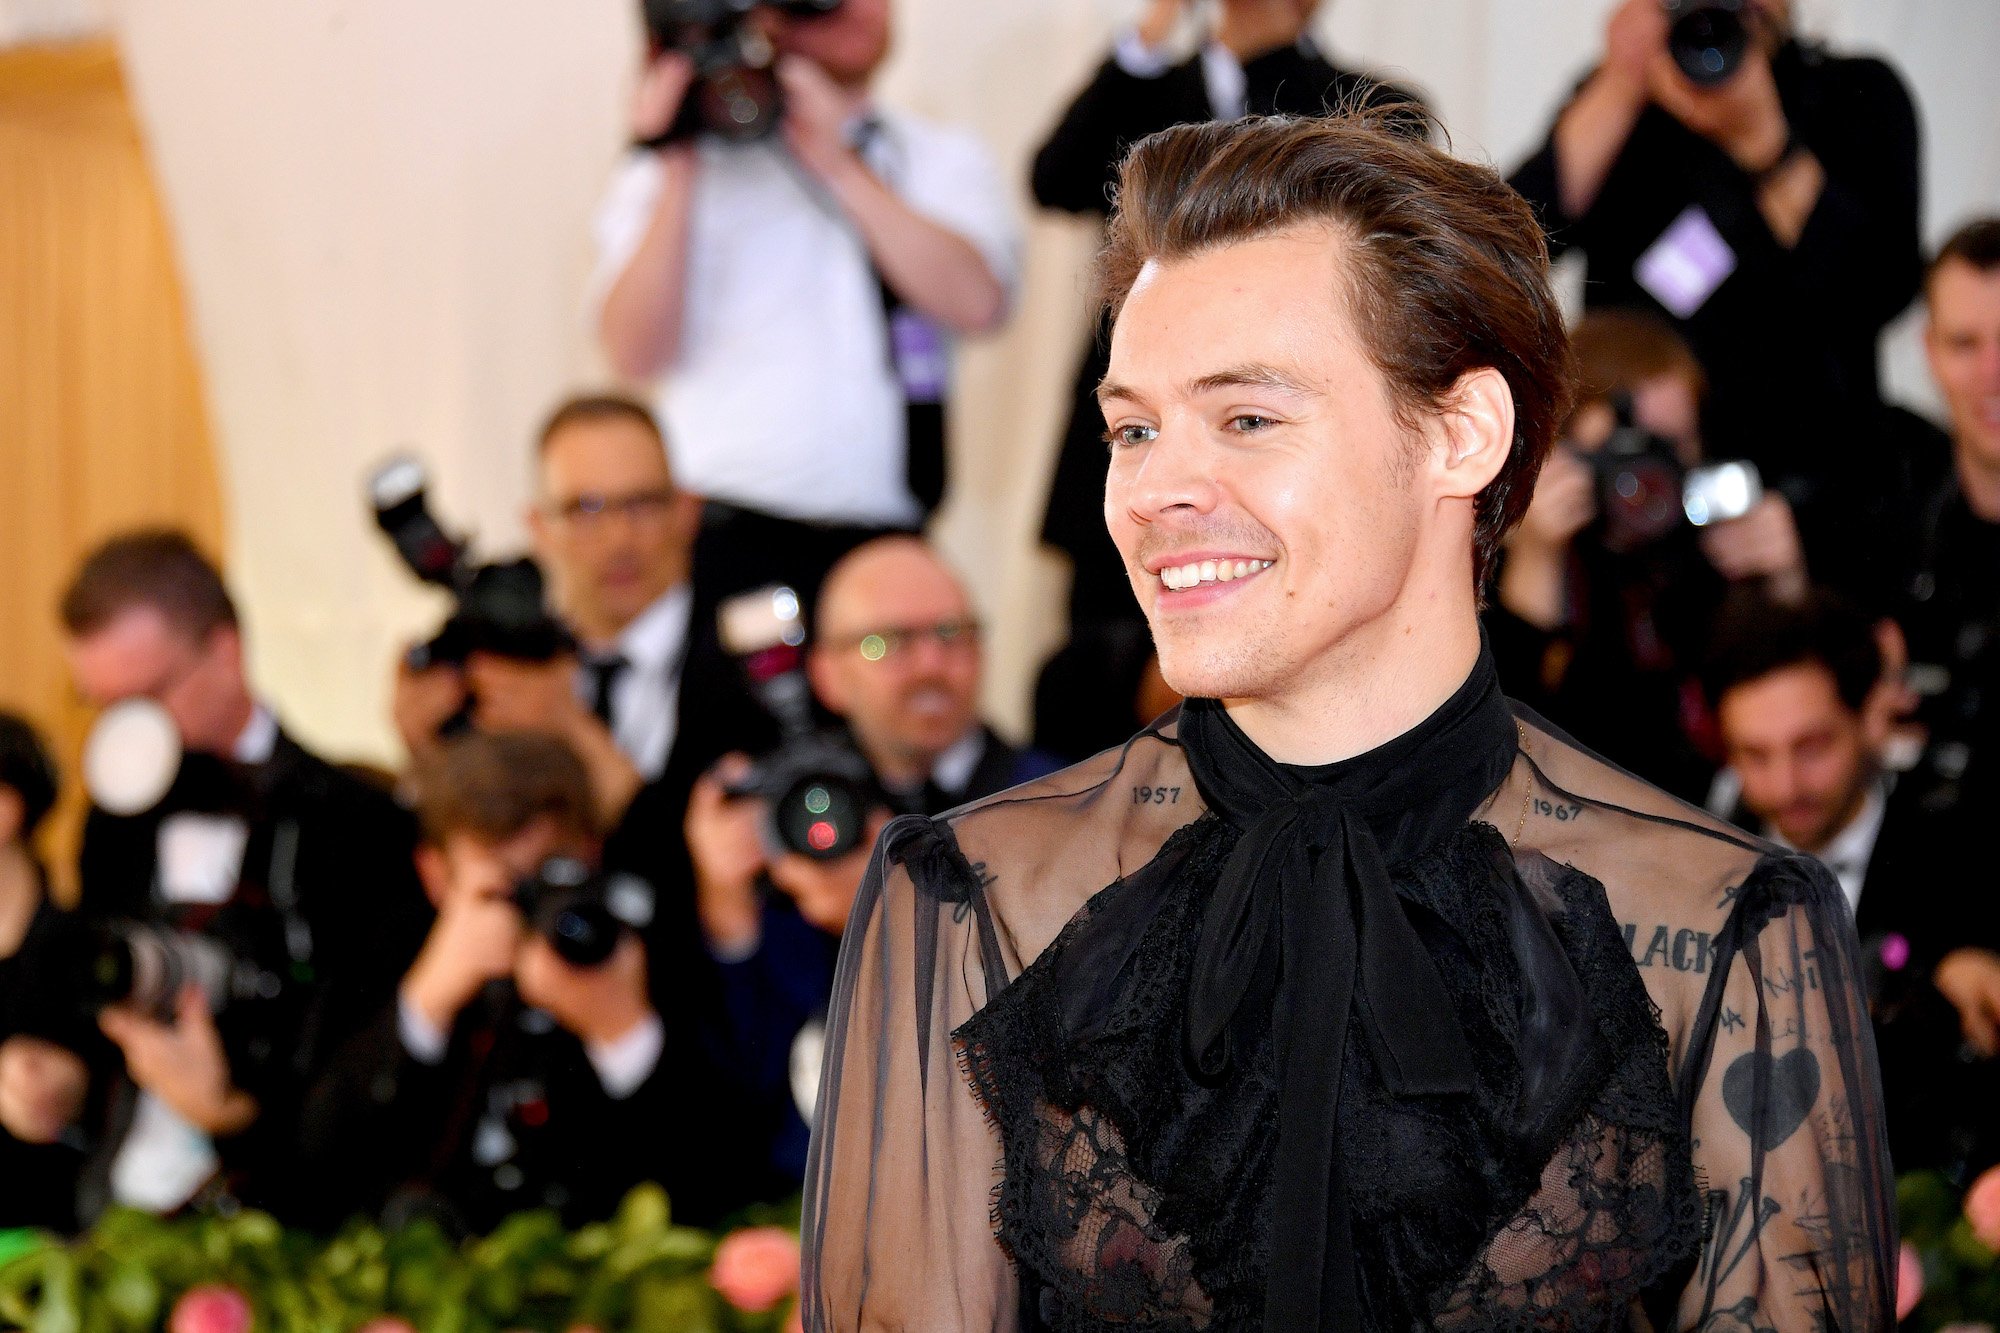 Harry Styles at The 2019 Met Gala Celebrating Camp on May 06, 2019.